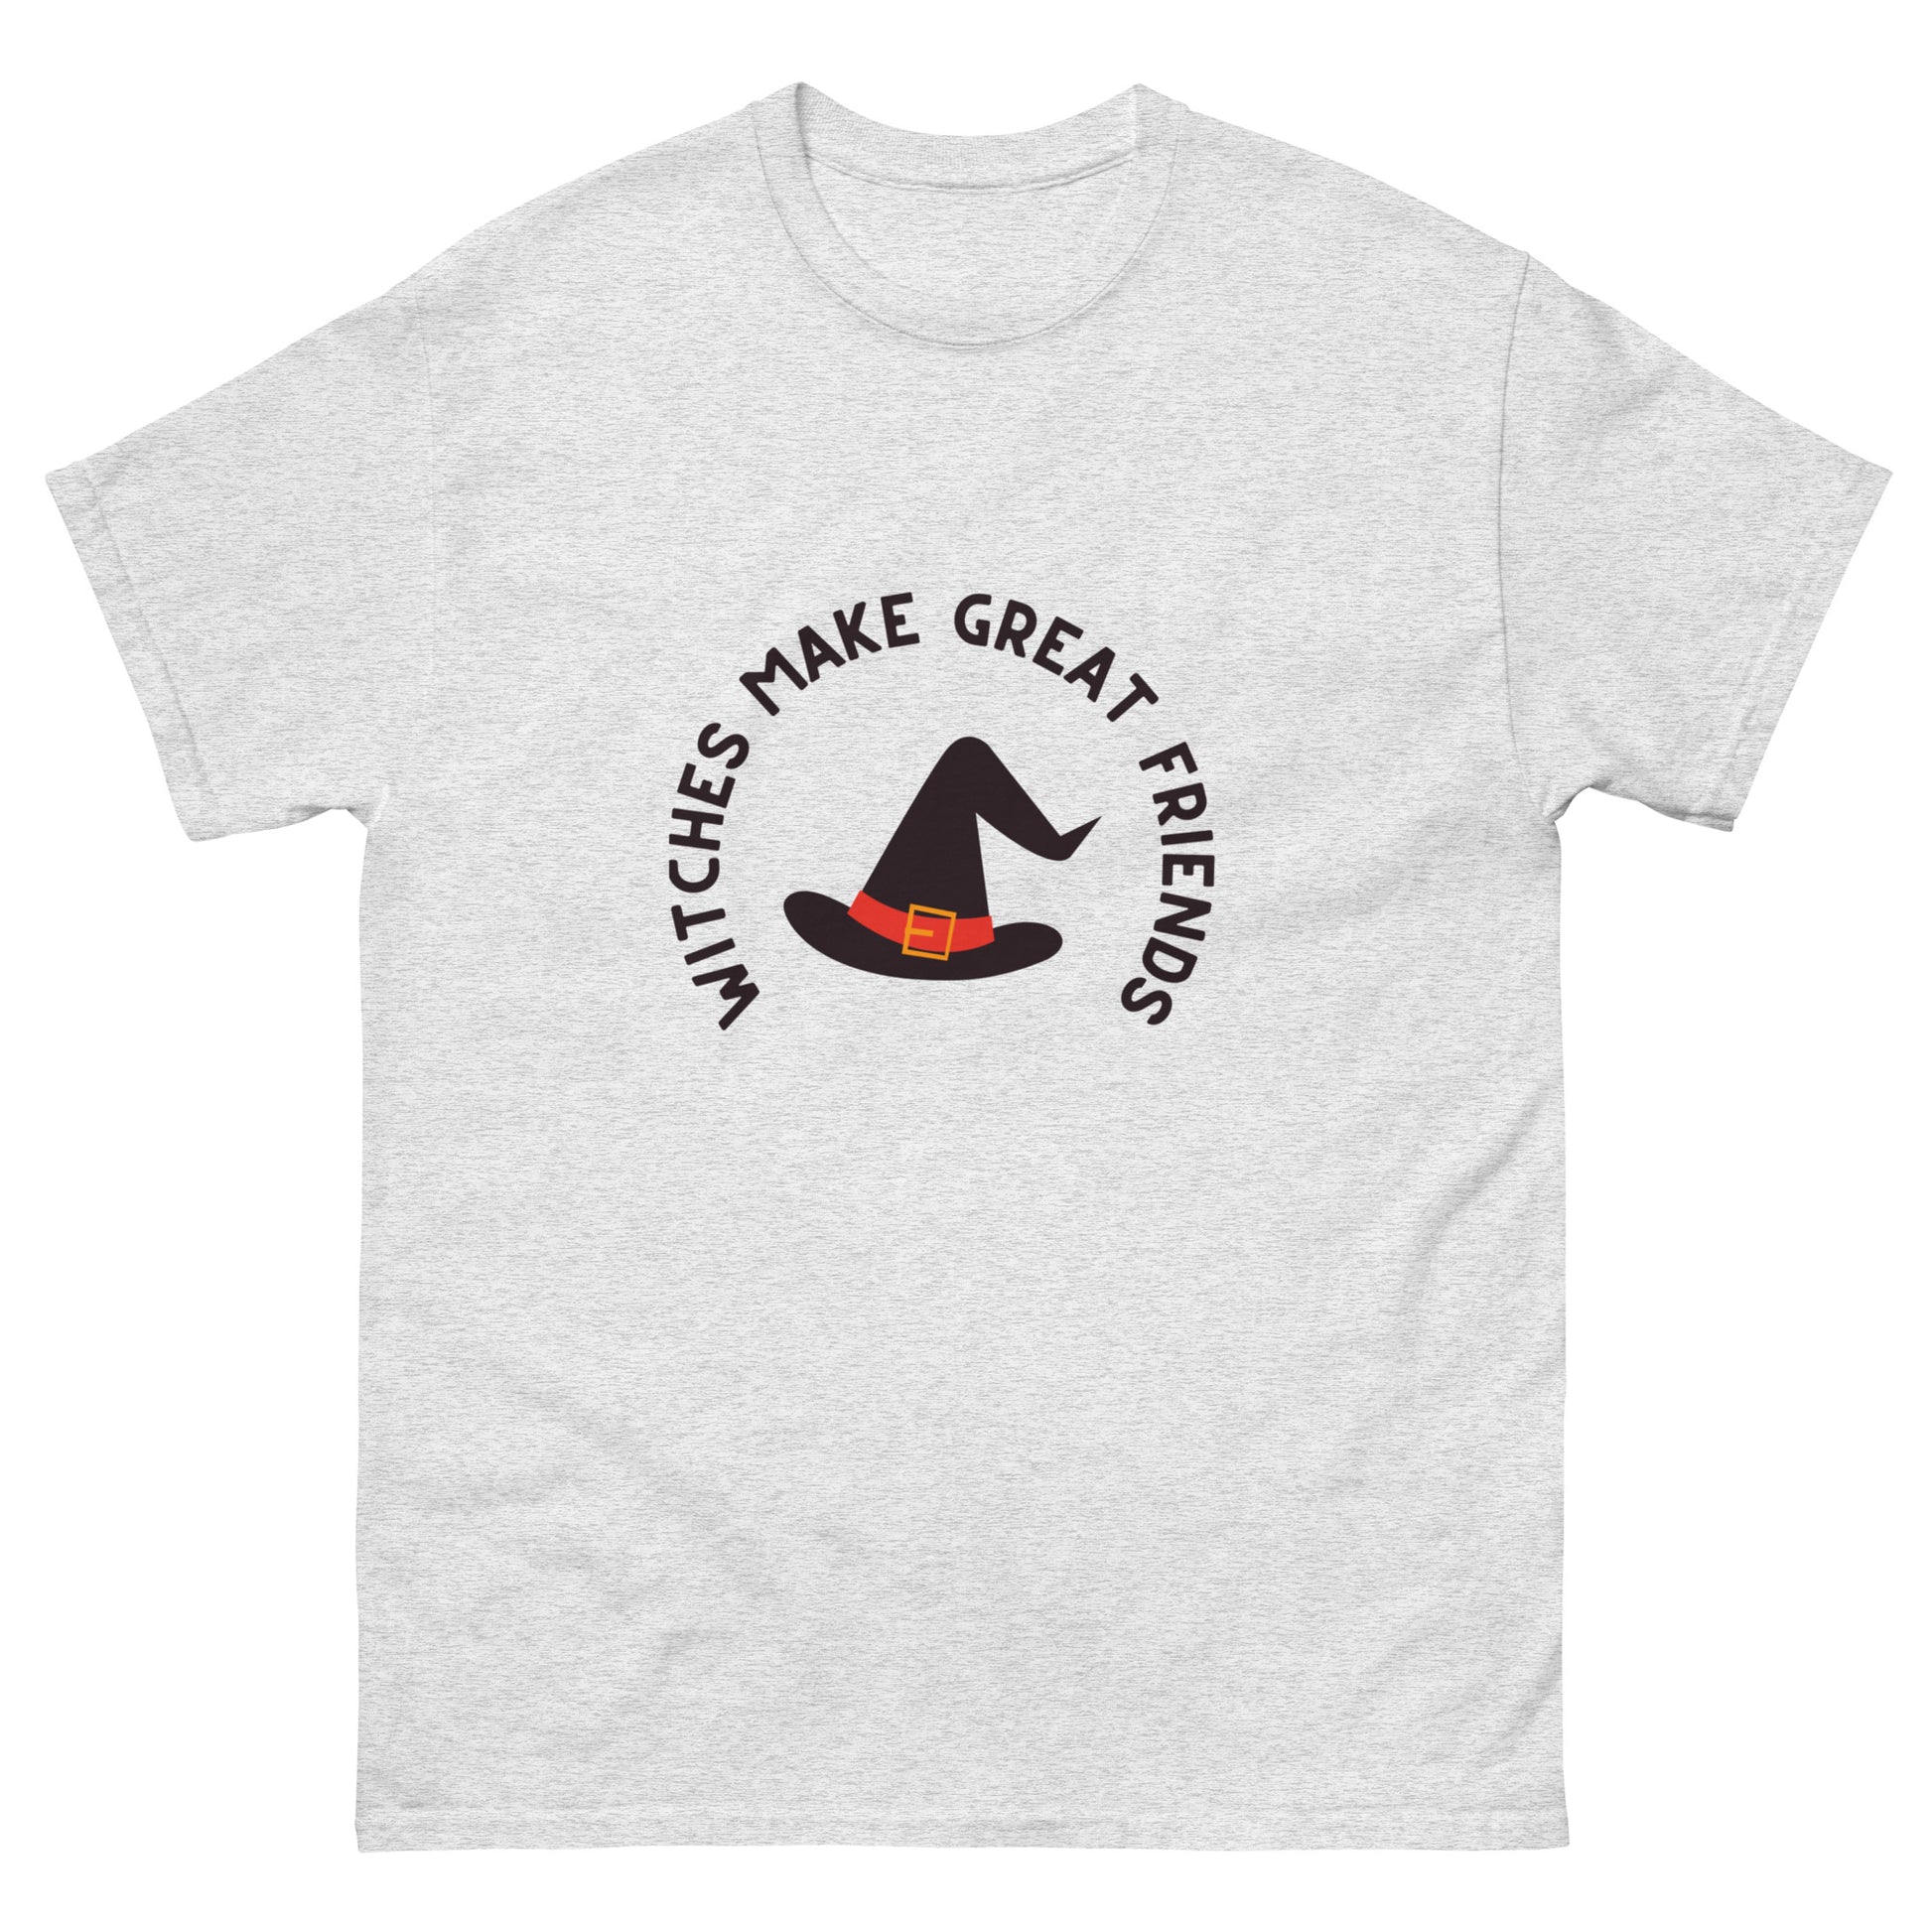 Witches Make Great Friends T-Shirt - The Good Life Vibe